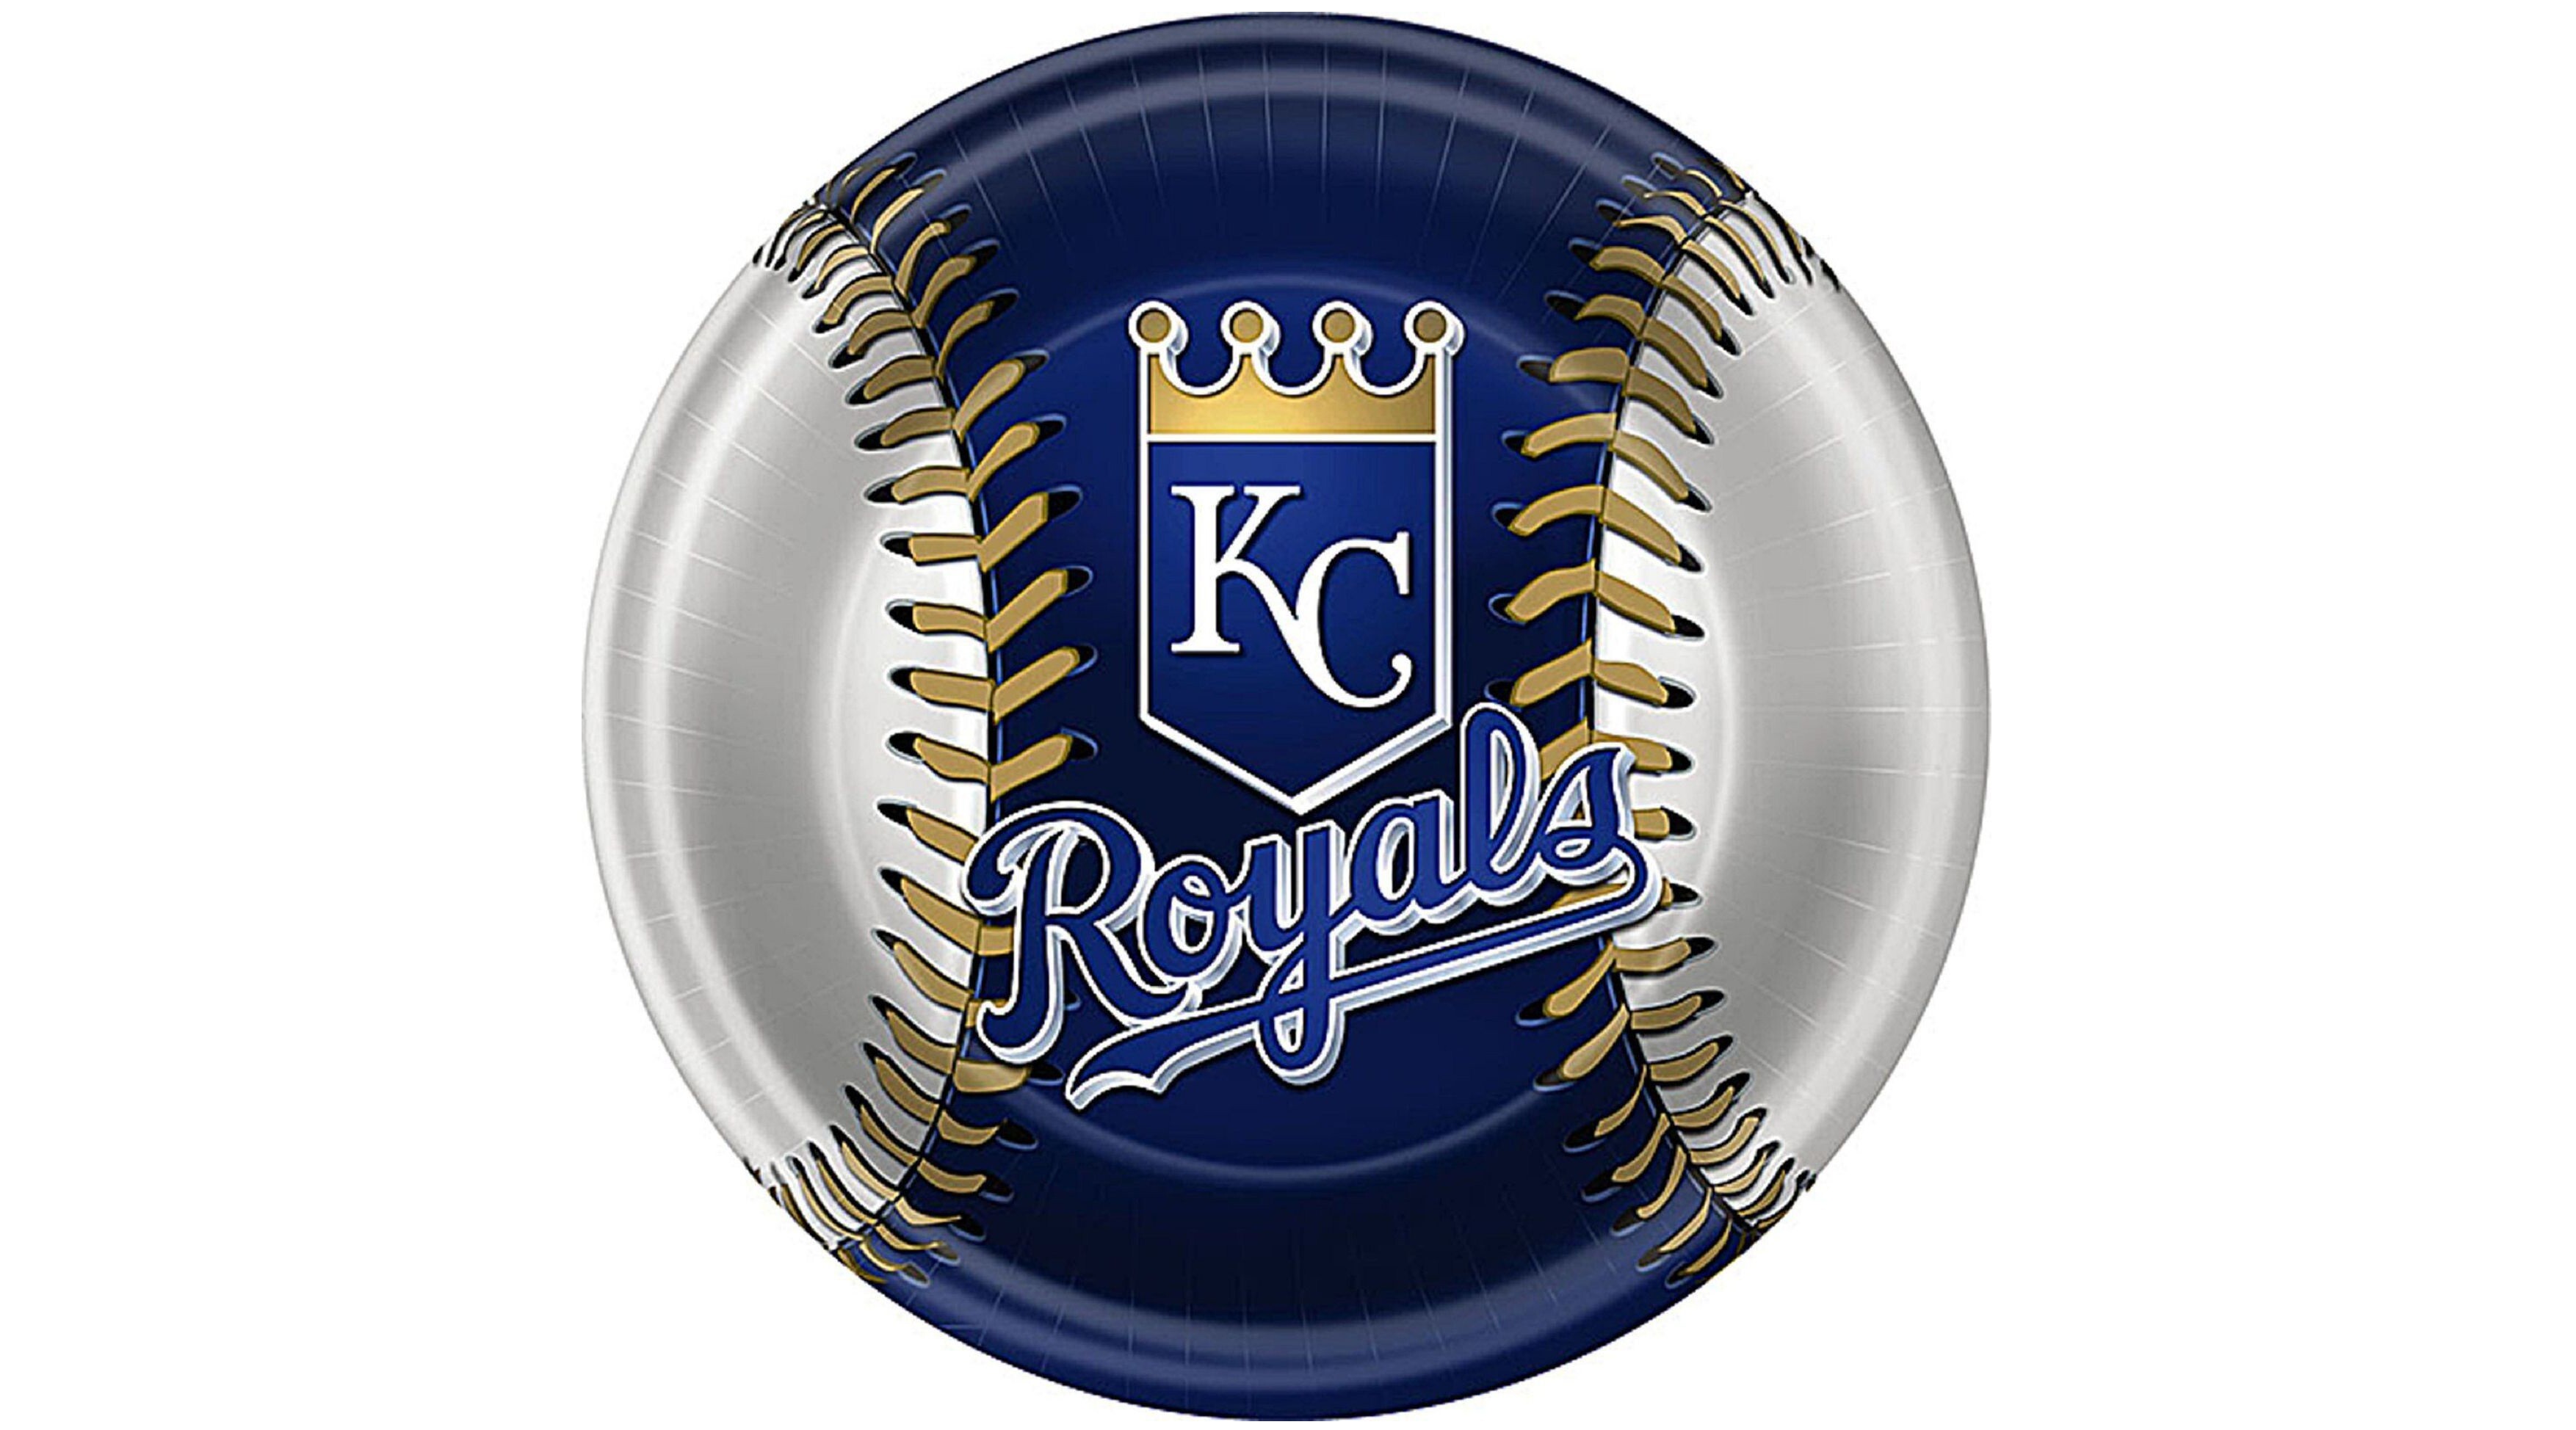 Kansas City Royals, HD wallpapers, High-quality images, Ultimate fan collection, 3510x1950 HD Desktop